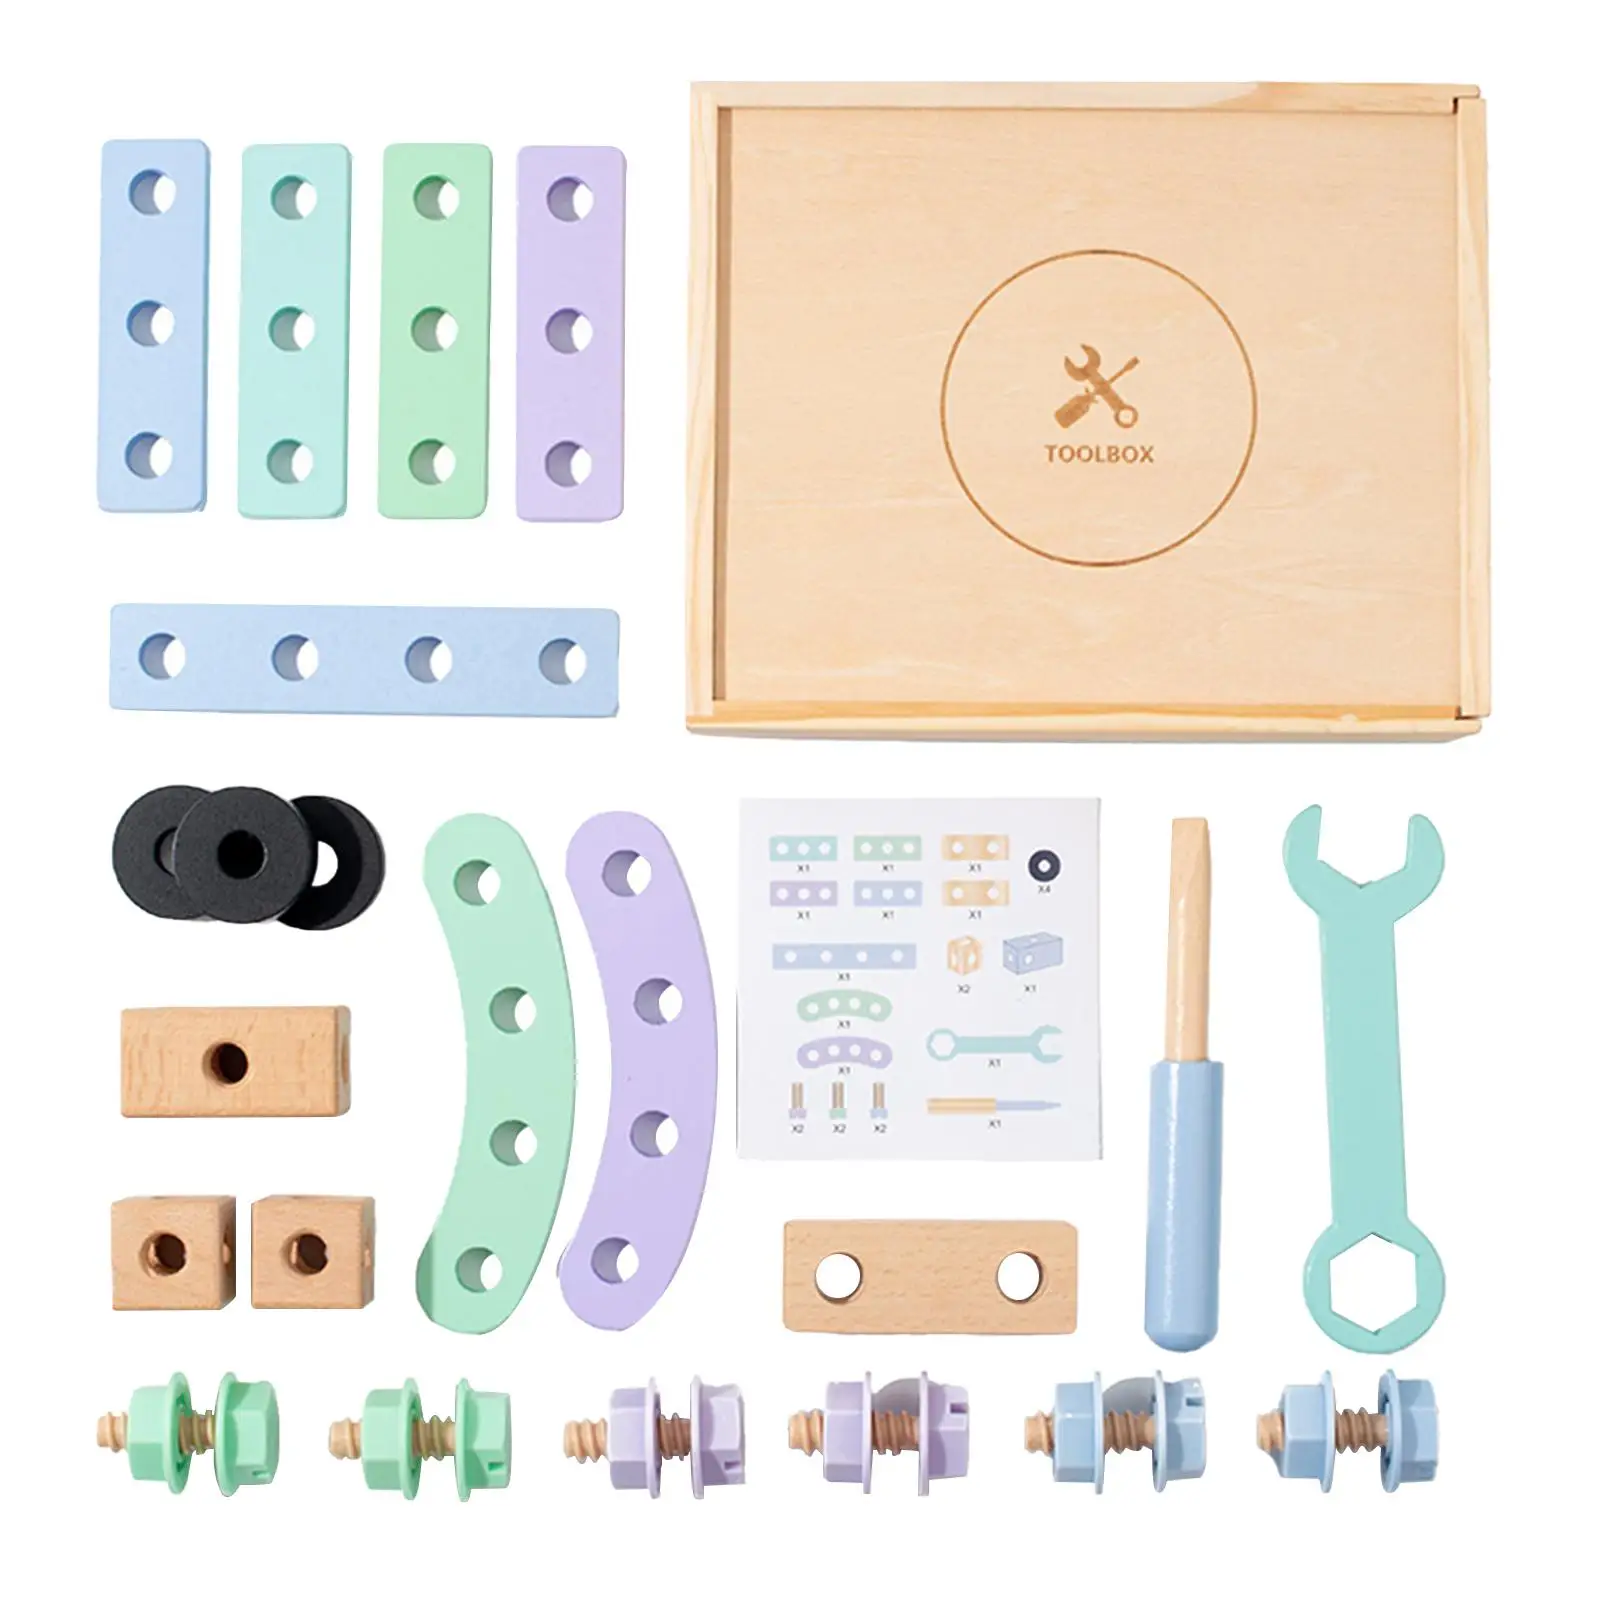 Wooden Repair Tool Box Toy Montessori Birthday Gifts Multifunctional Sturdy DIY Stem Learning Toys for Preschool Baby Kids